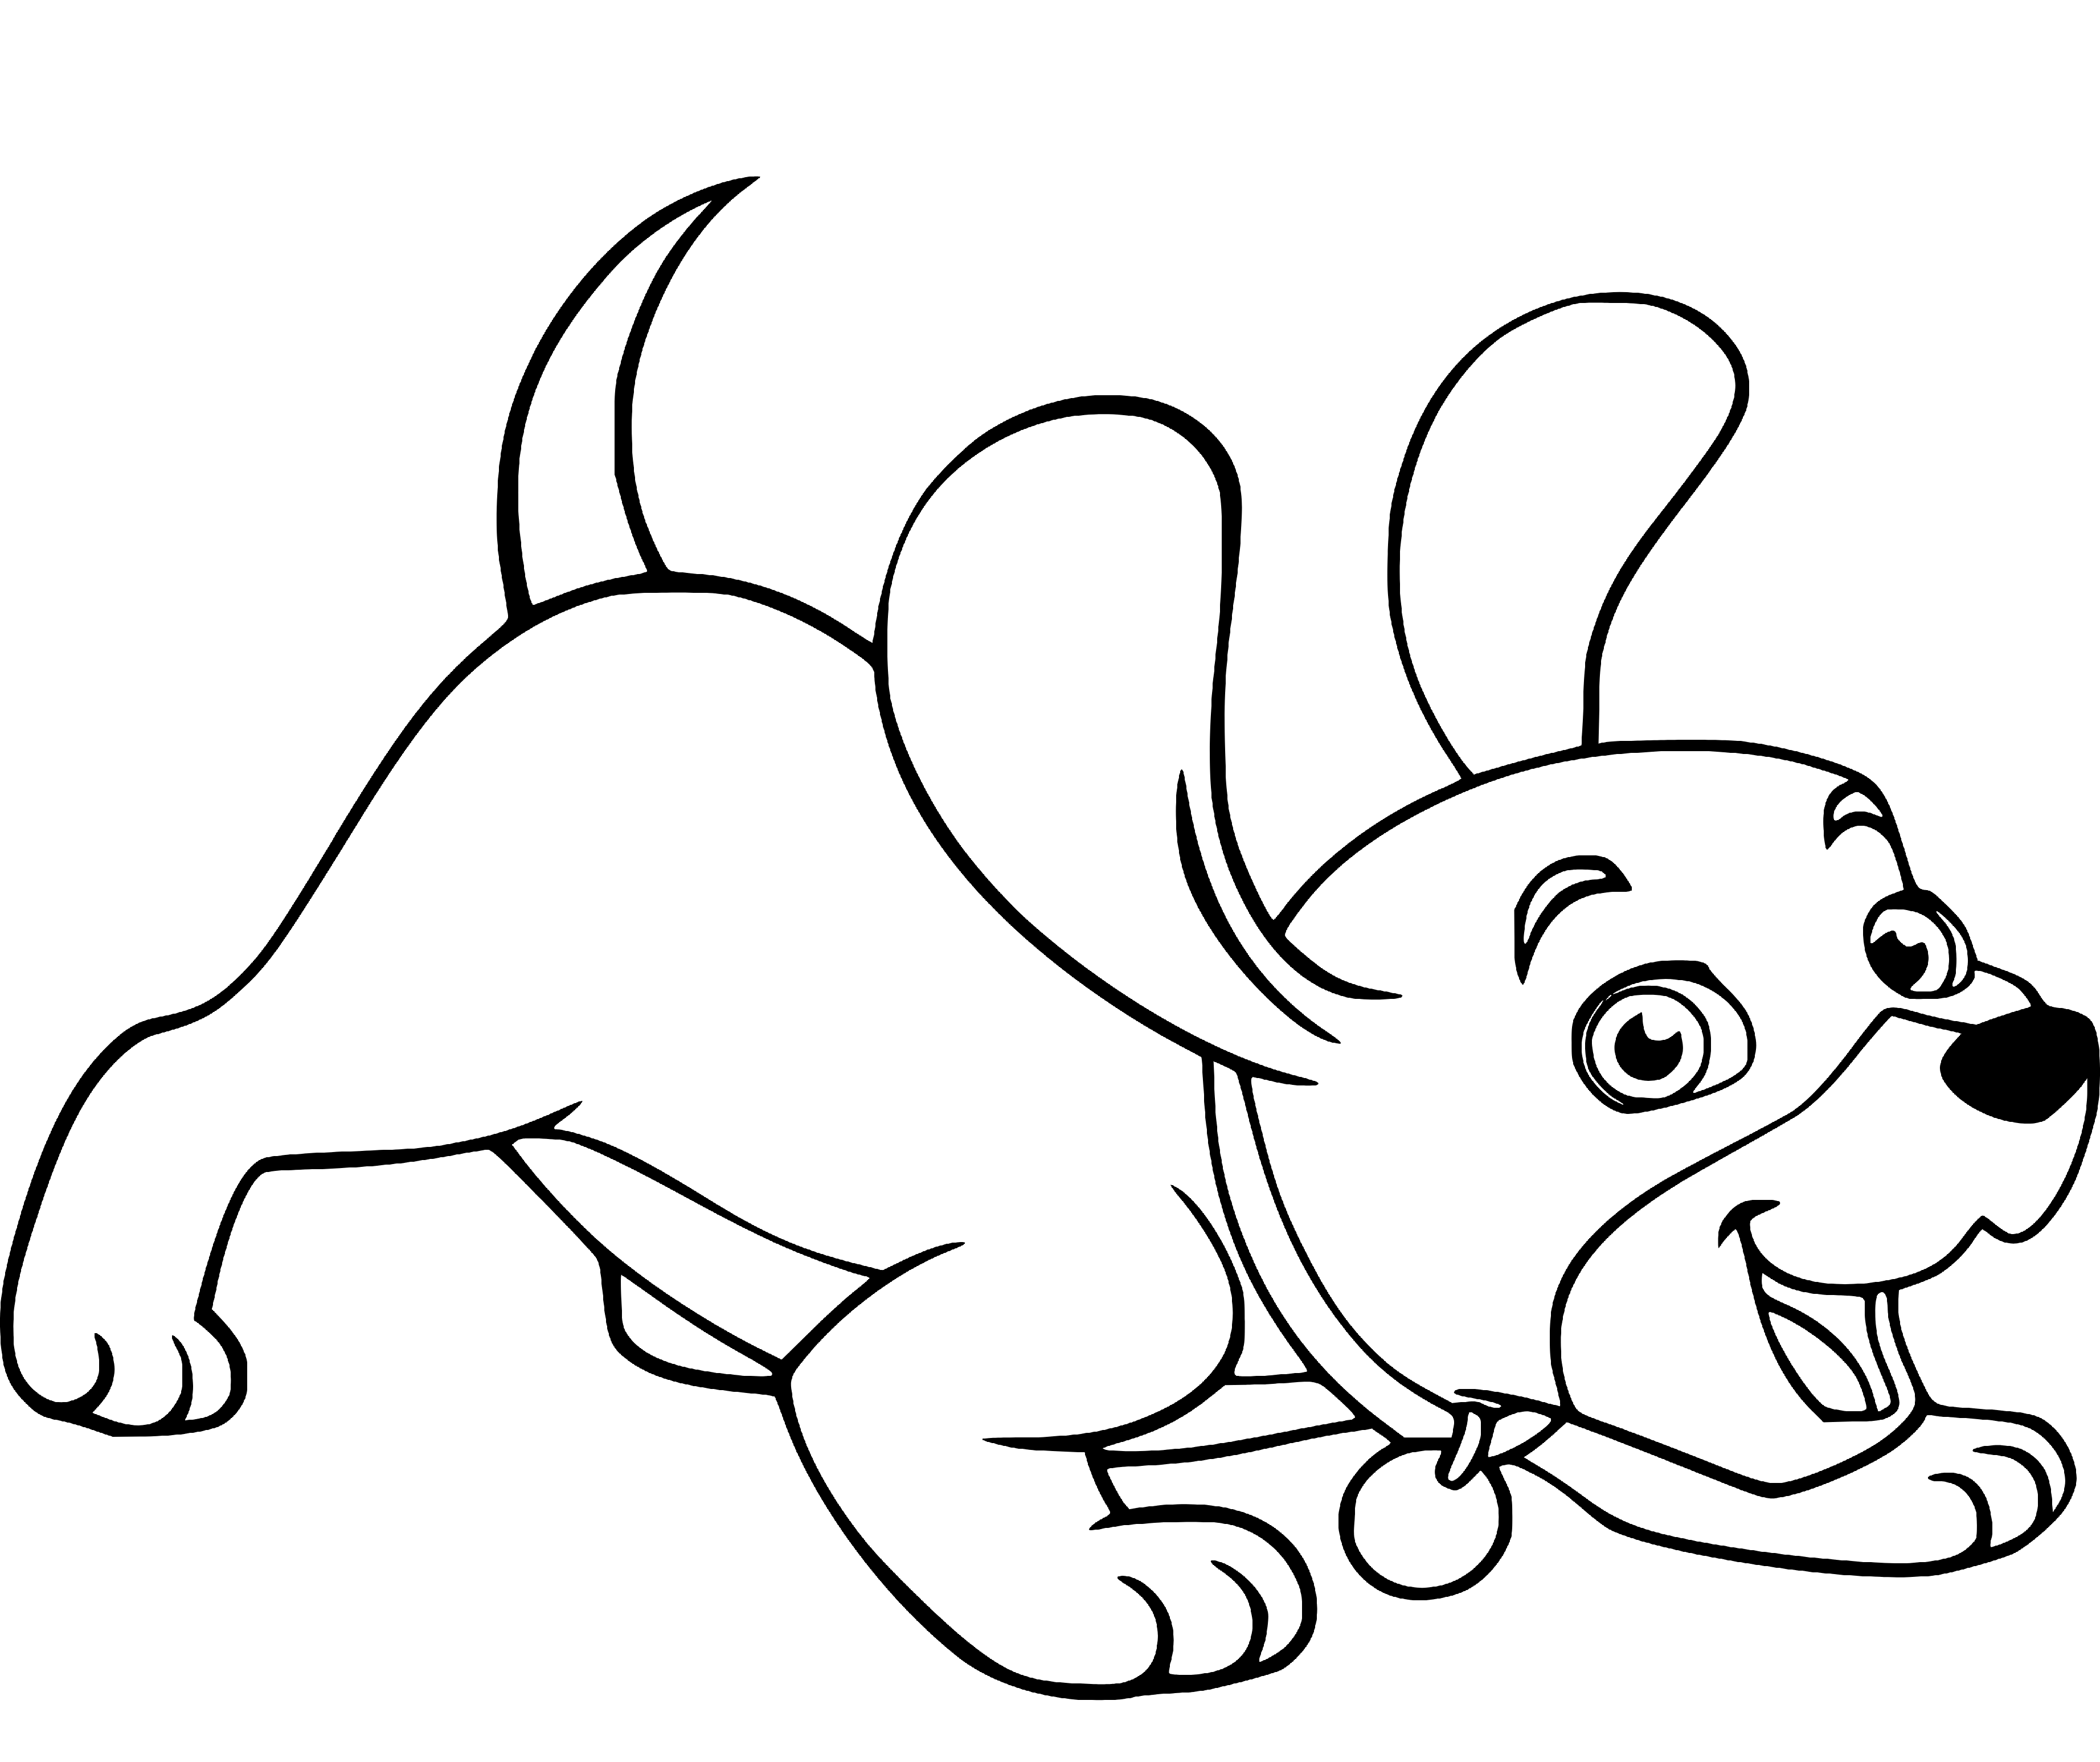 Printable Barking Puppy Coloring Page for kids.